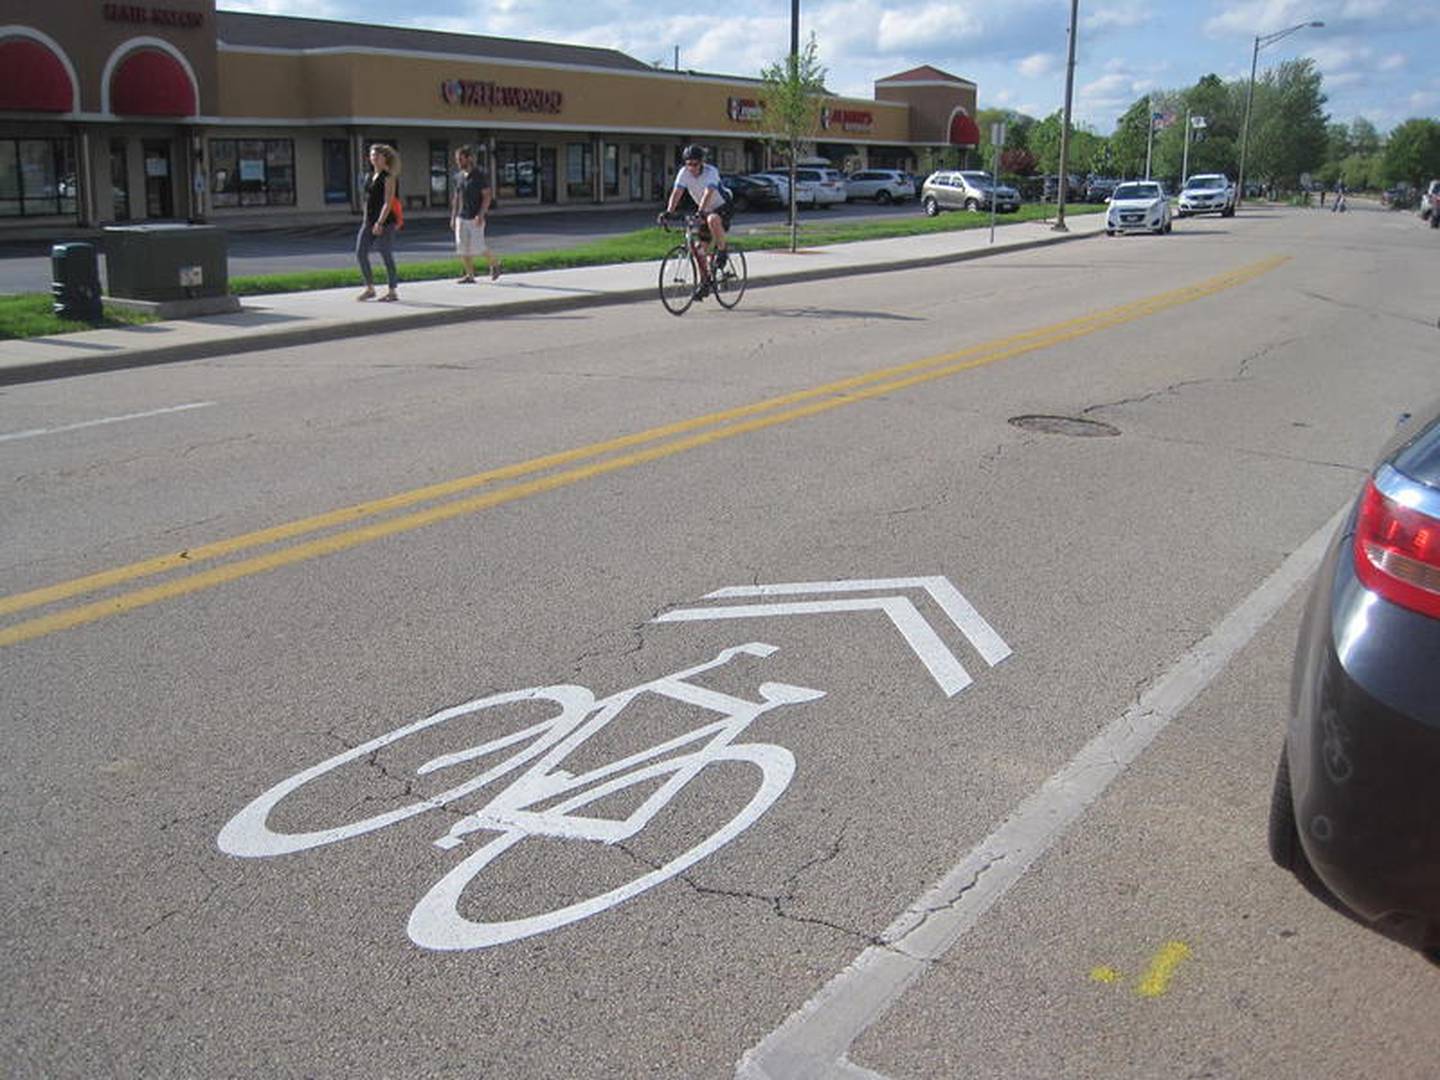 A bicyclist rides along Batavia's Island Avenue in a "sharrow," a shared lane for both bicycles and motor vehicles. The pavement marking in the foreground designates a shared lane. The city of Batavia has placed the markings along the length of Island and Shumway avenues to provide cyclists with a better link between the four legs of the Fox River Trail that converge in downtown Batavia.